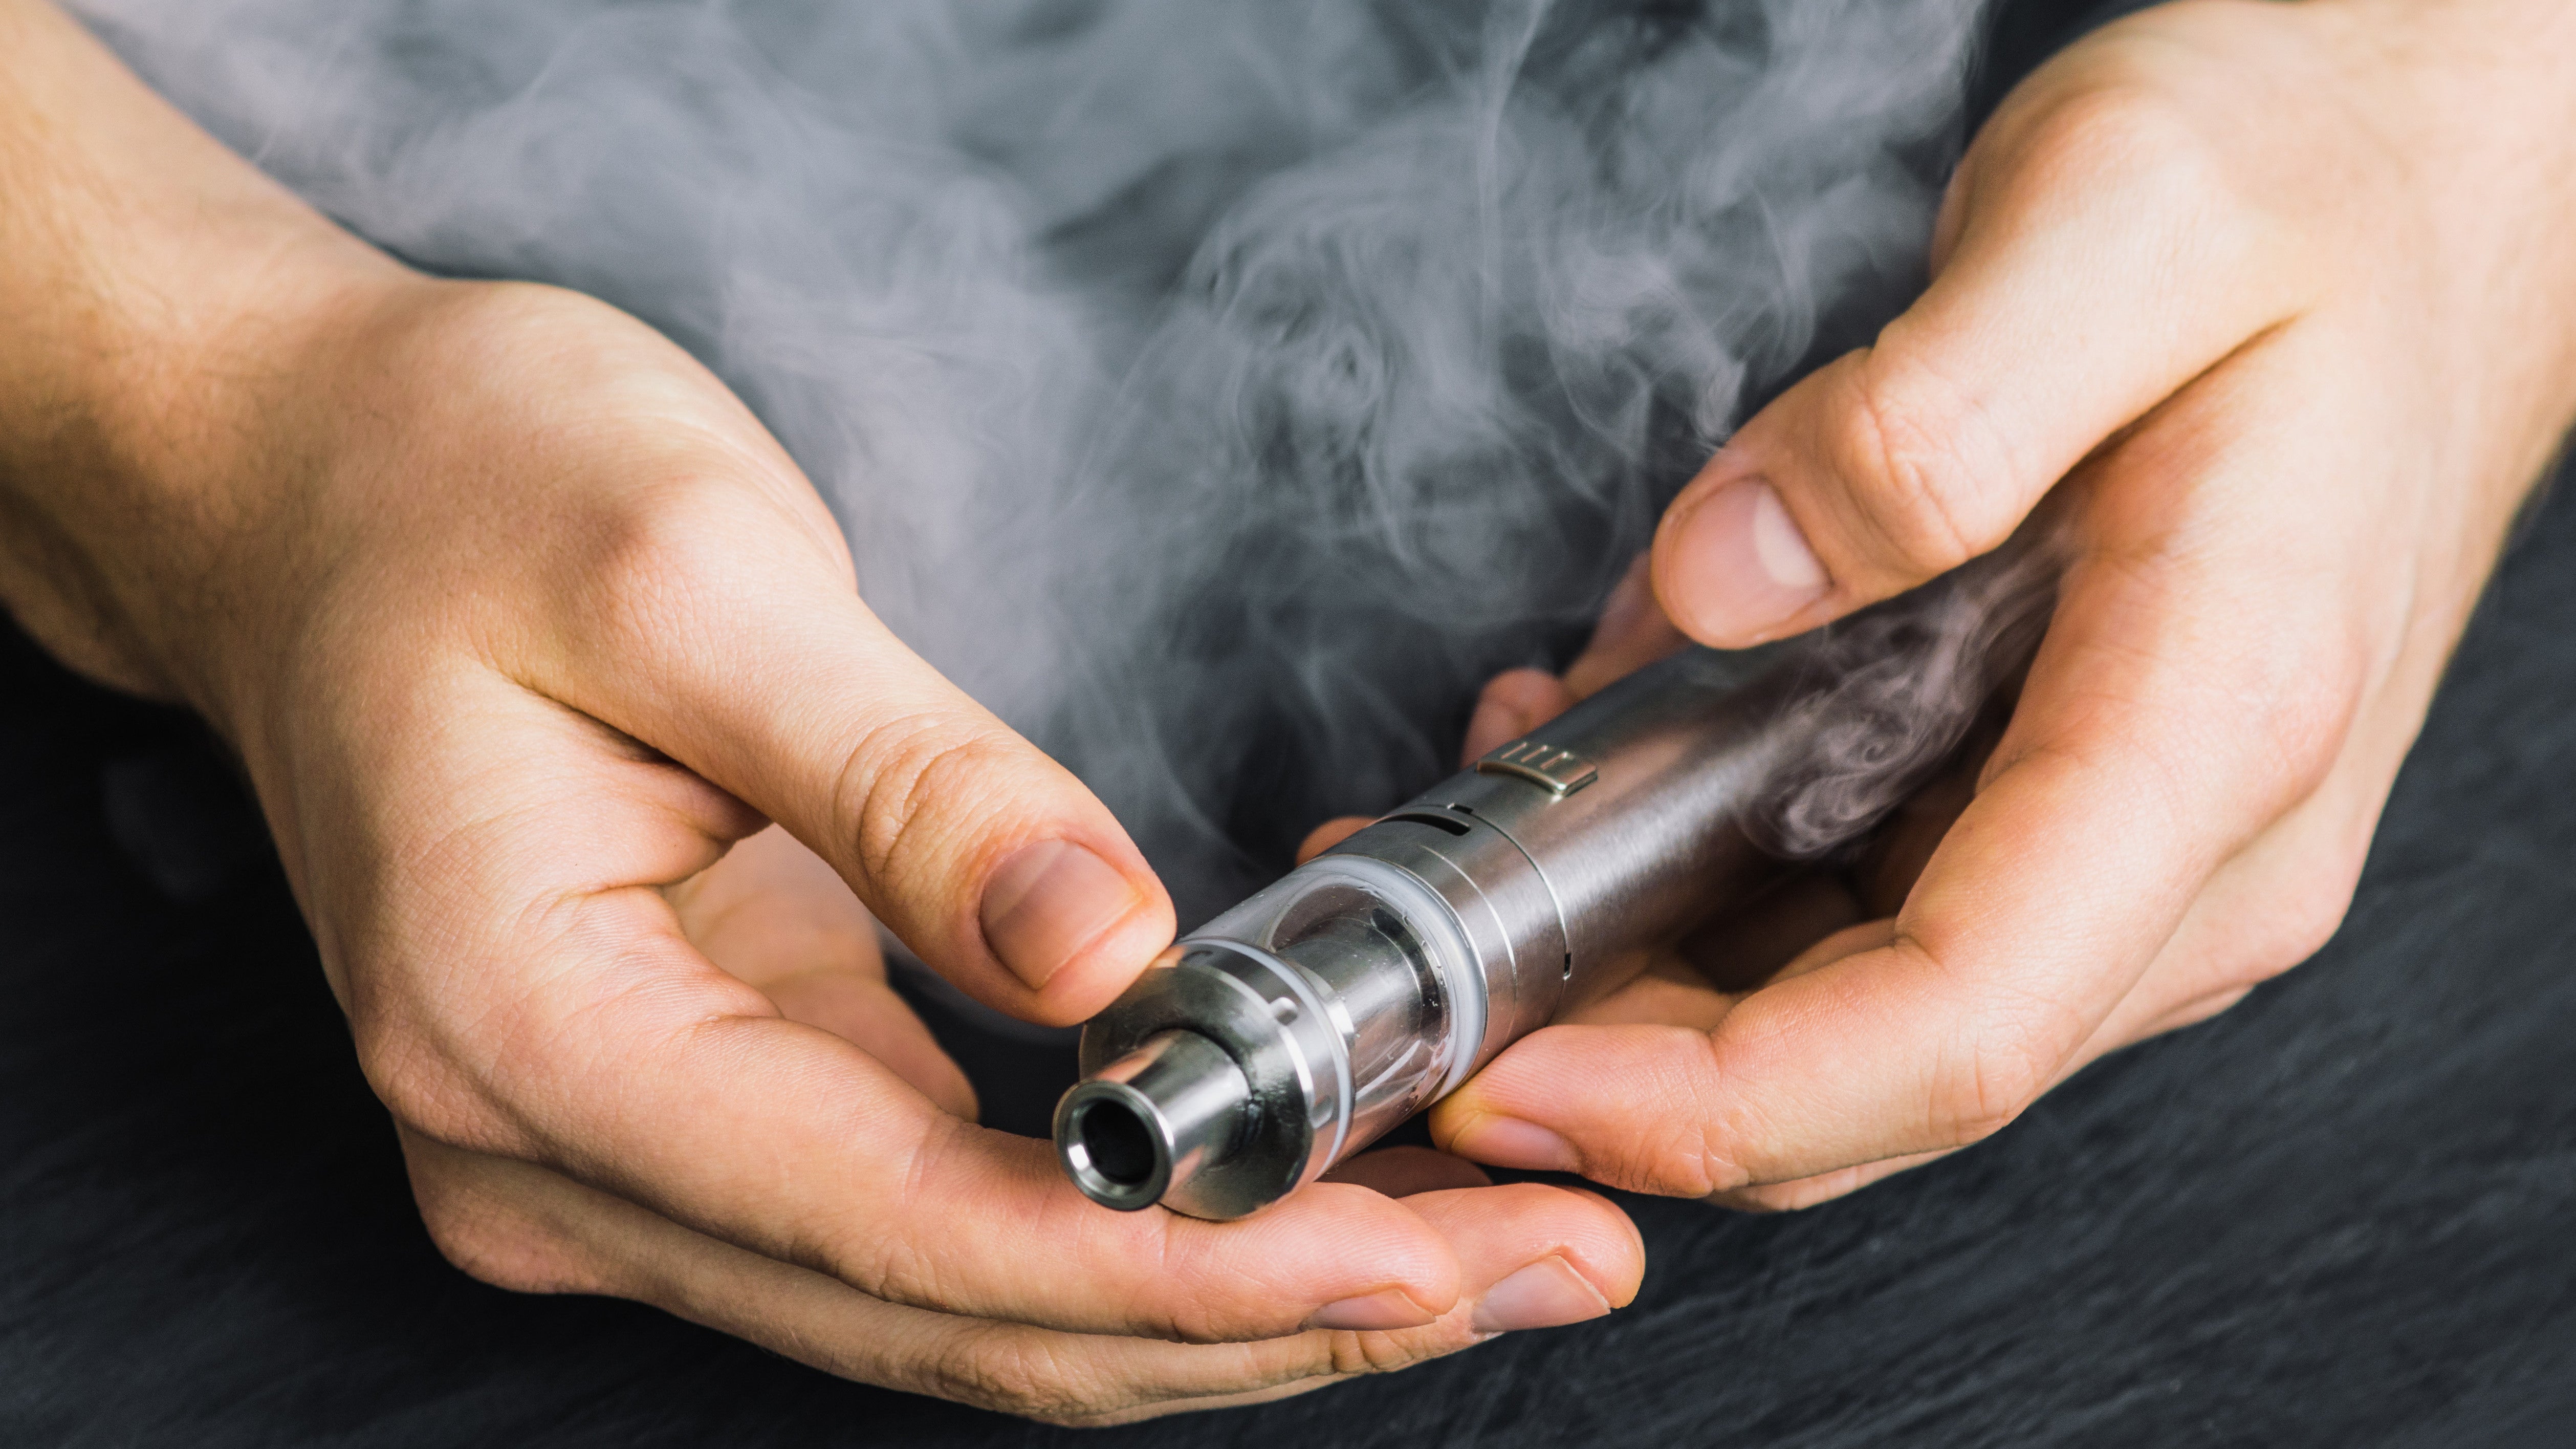 Everything We Learned About Vaping In 2019